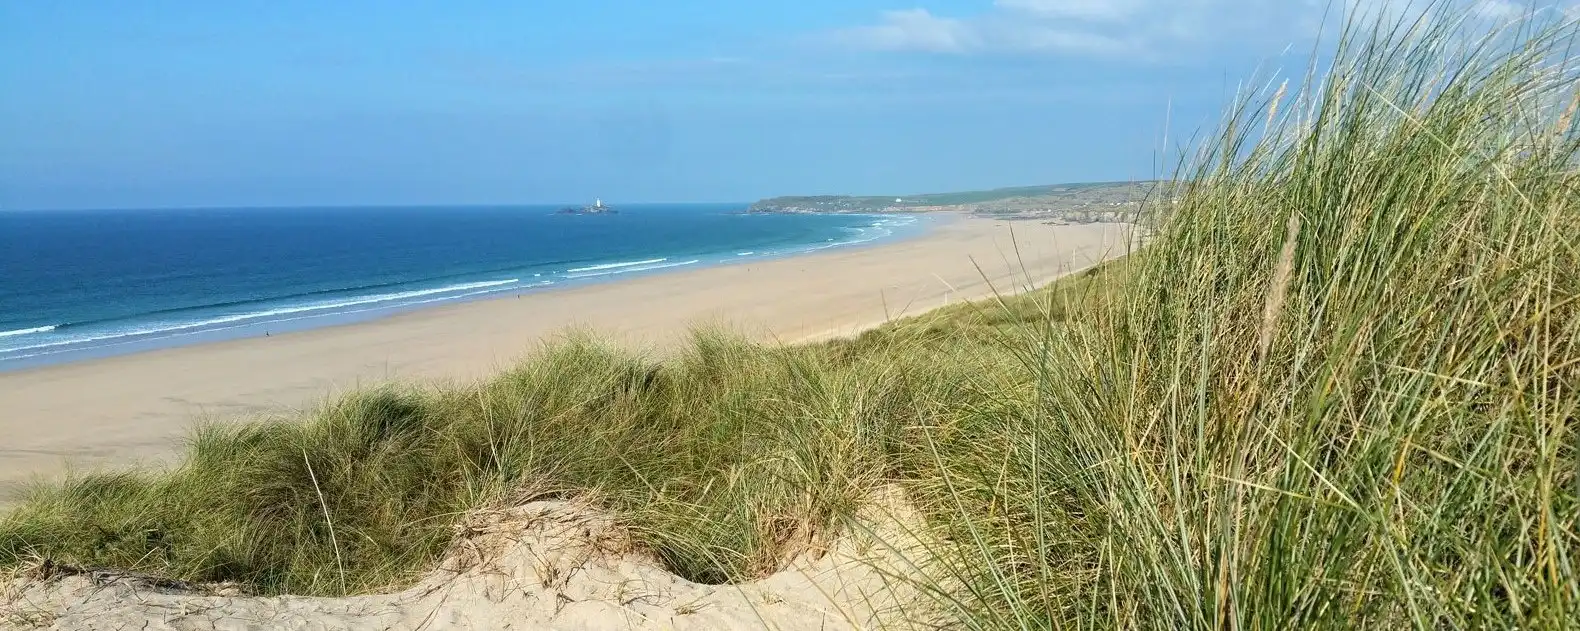 Morryp beach holiday views in hayle